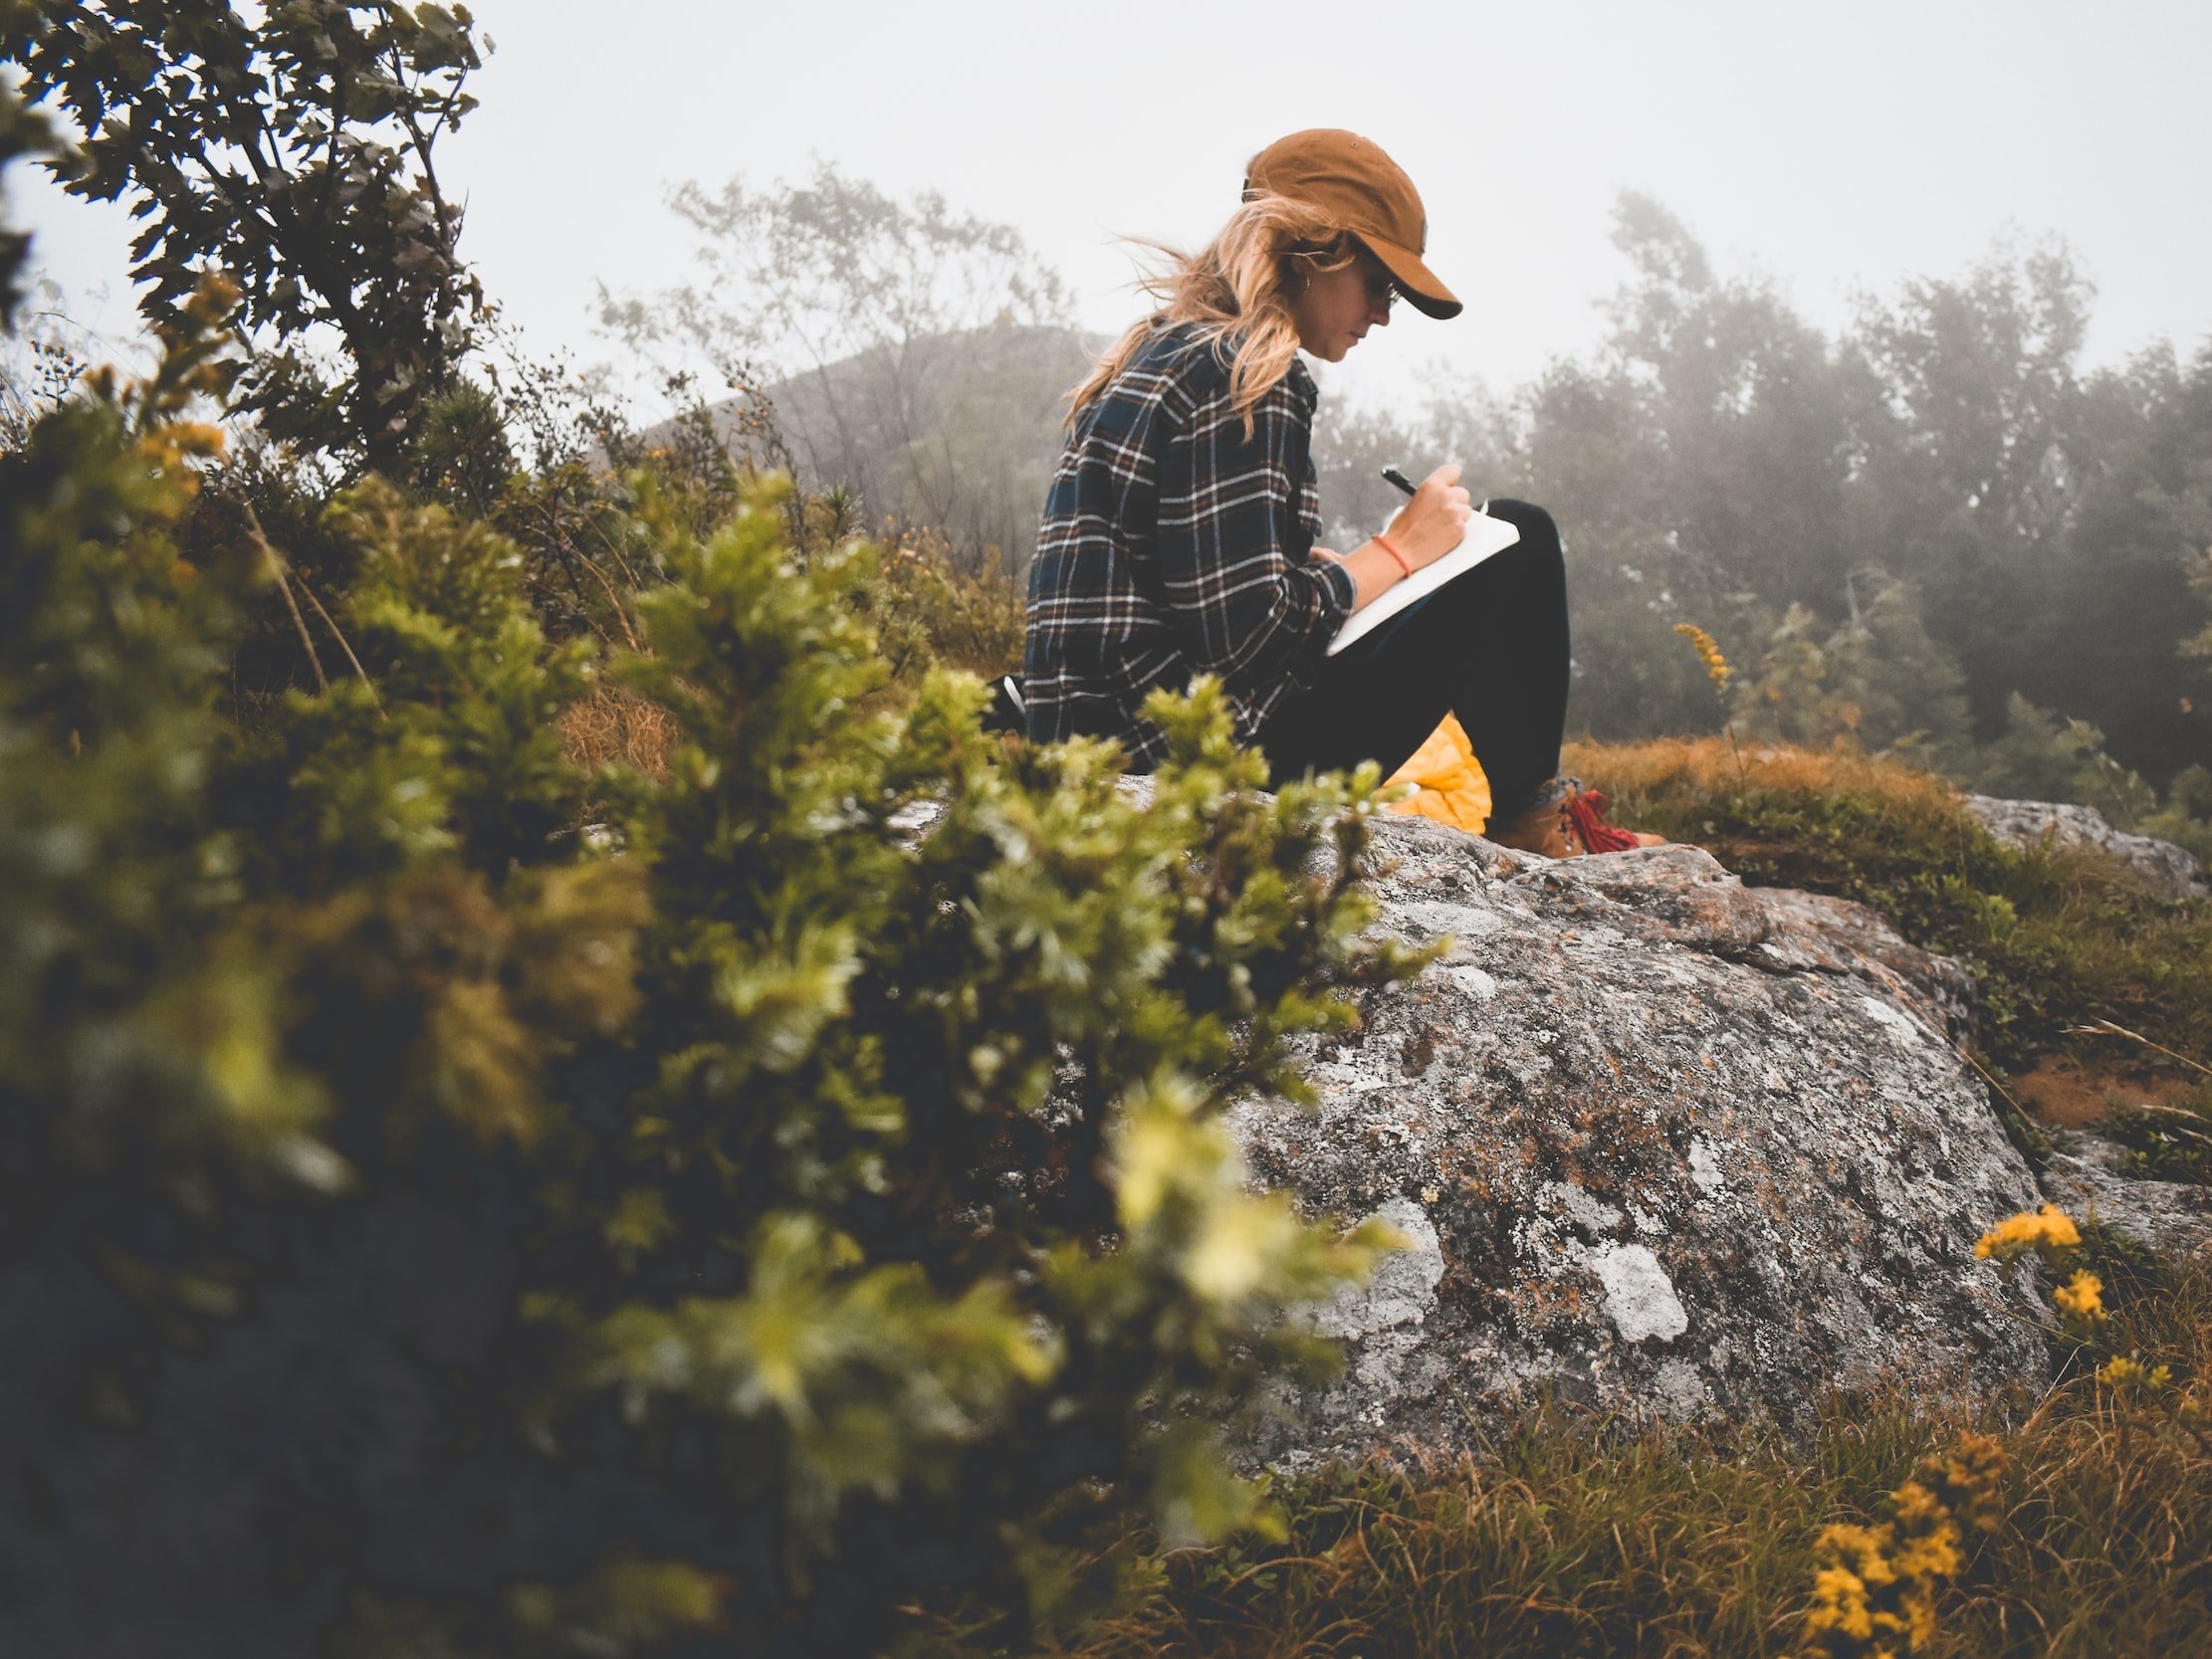 A woman writes while sitting on a rock in the countryside.